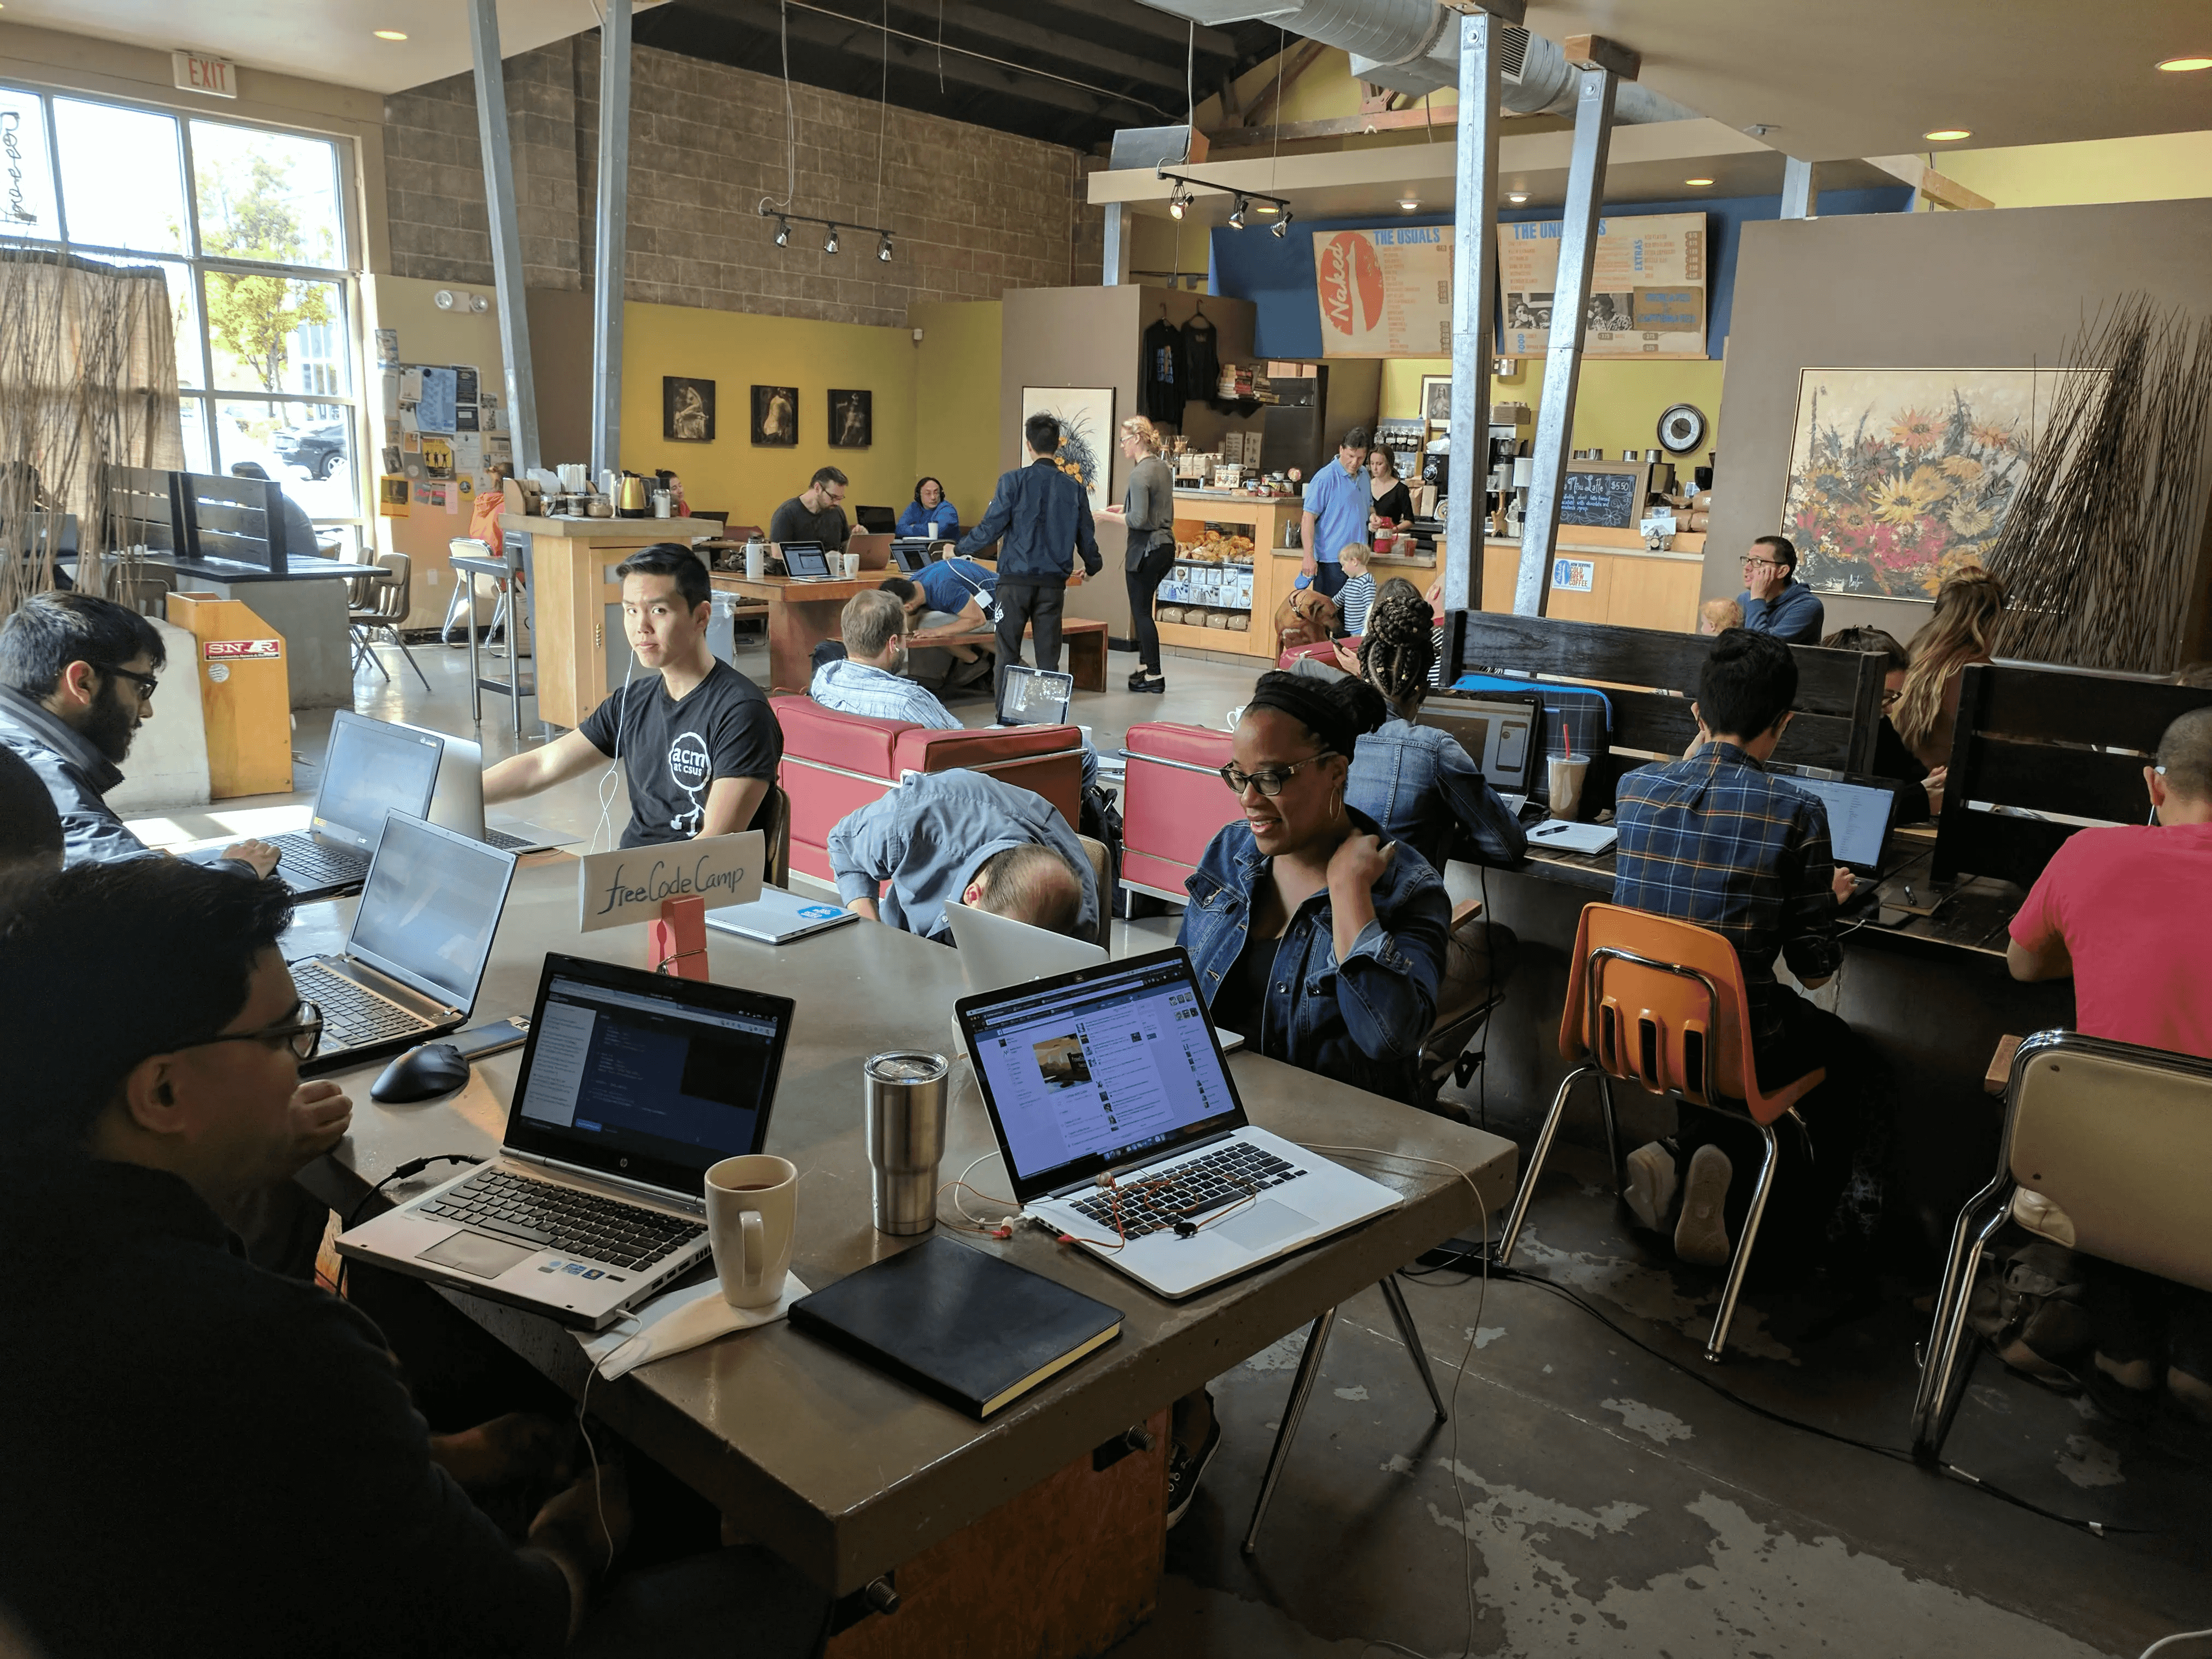 A freeCodeCamp community event held at a coffee shop